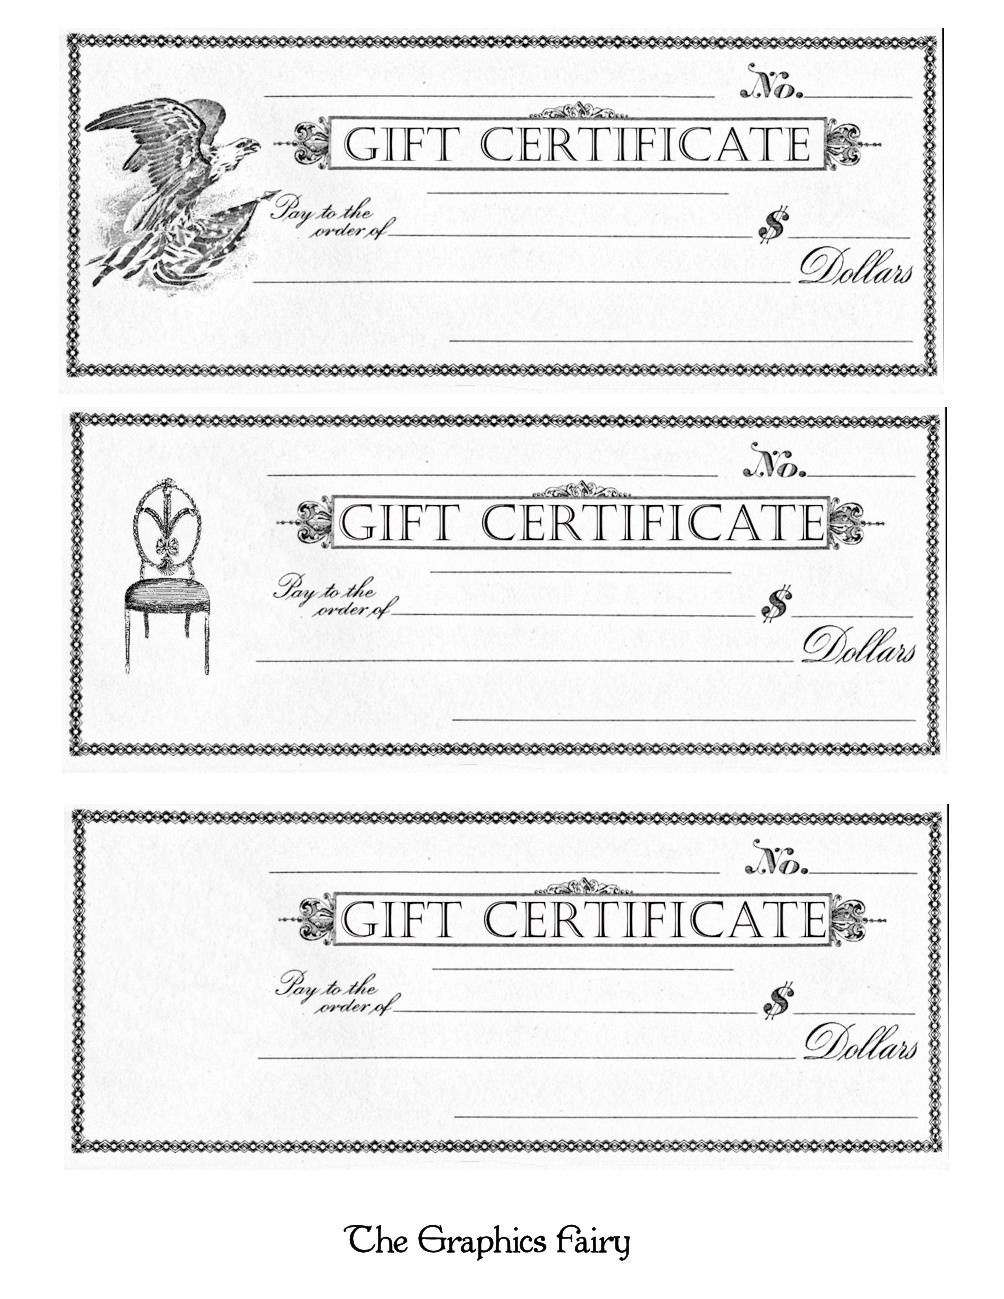 Free Printable - Gift Certificates - The Graphics Fairy - Free Printable Gift Coupons